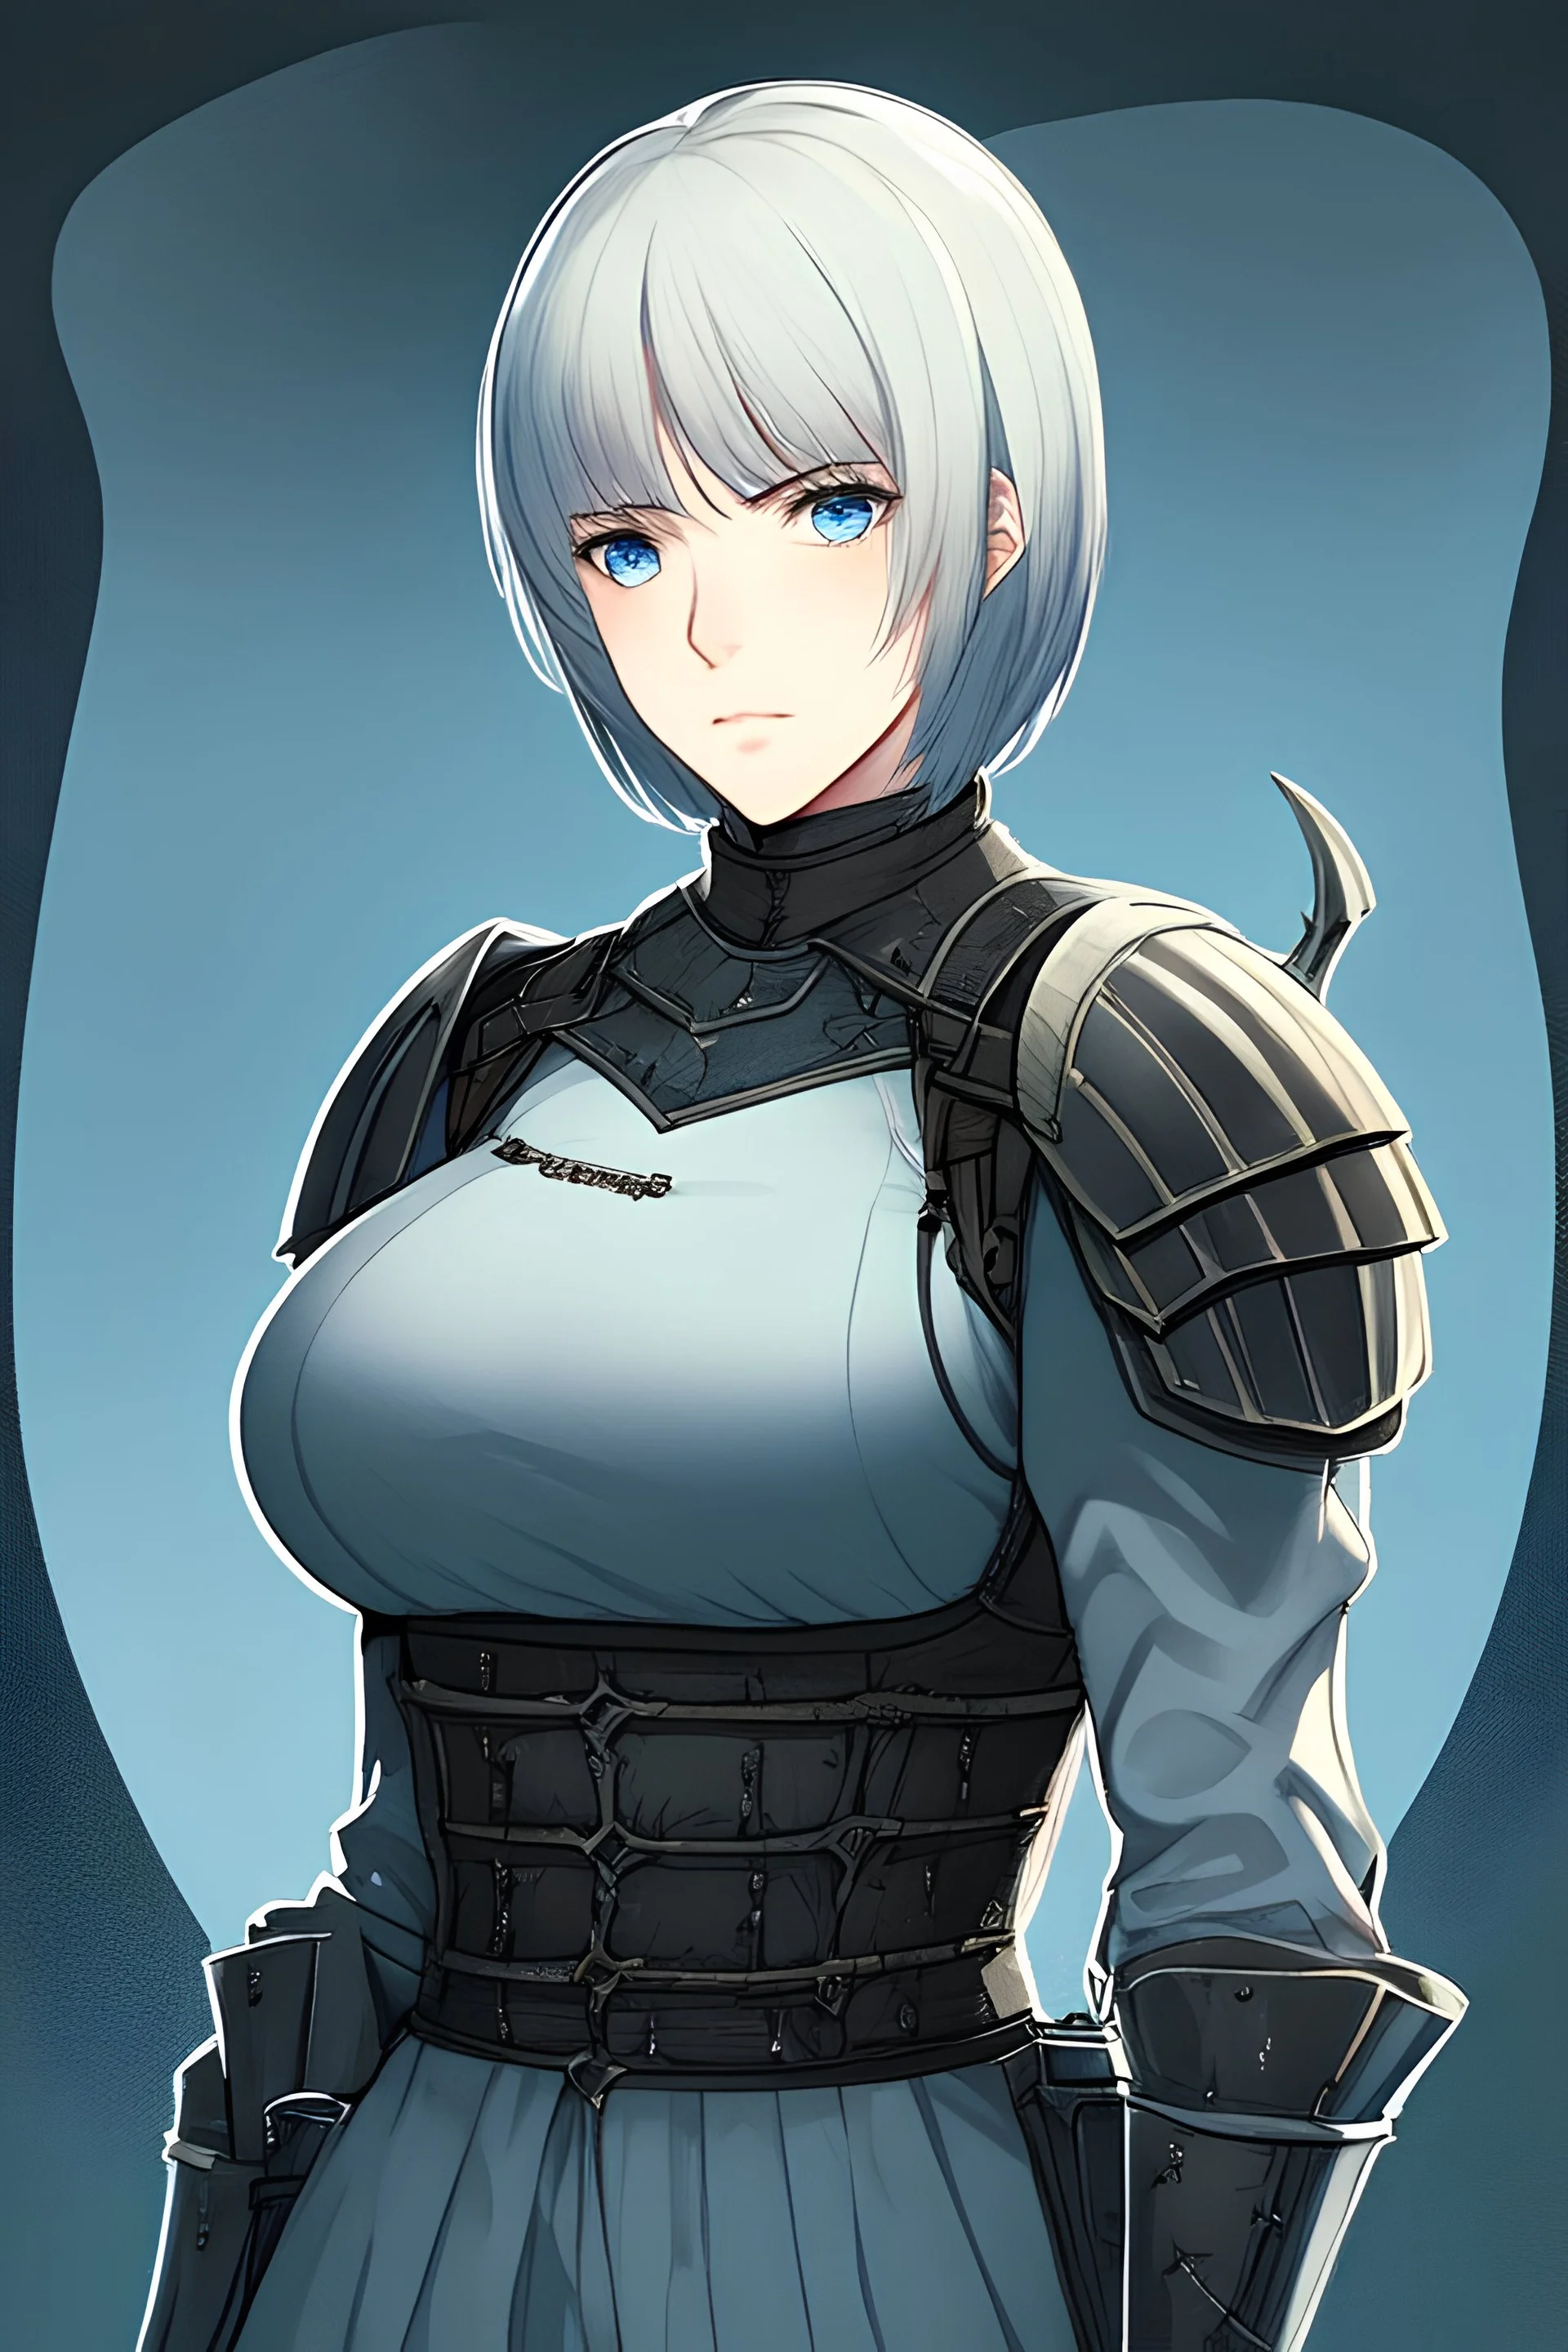 Motoko Kusanagi from Ghost In The Shell (1995), clad in medieval stell plate armour, melancholic, alone, big blue eyes, perfect, beautiful